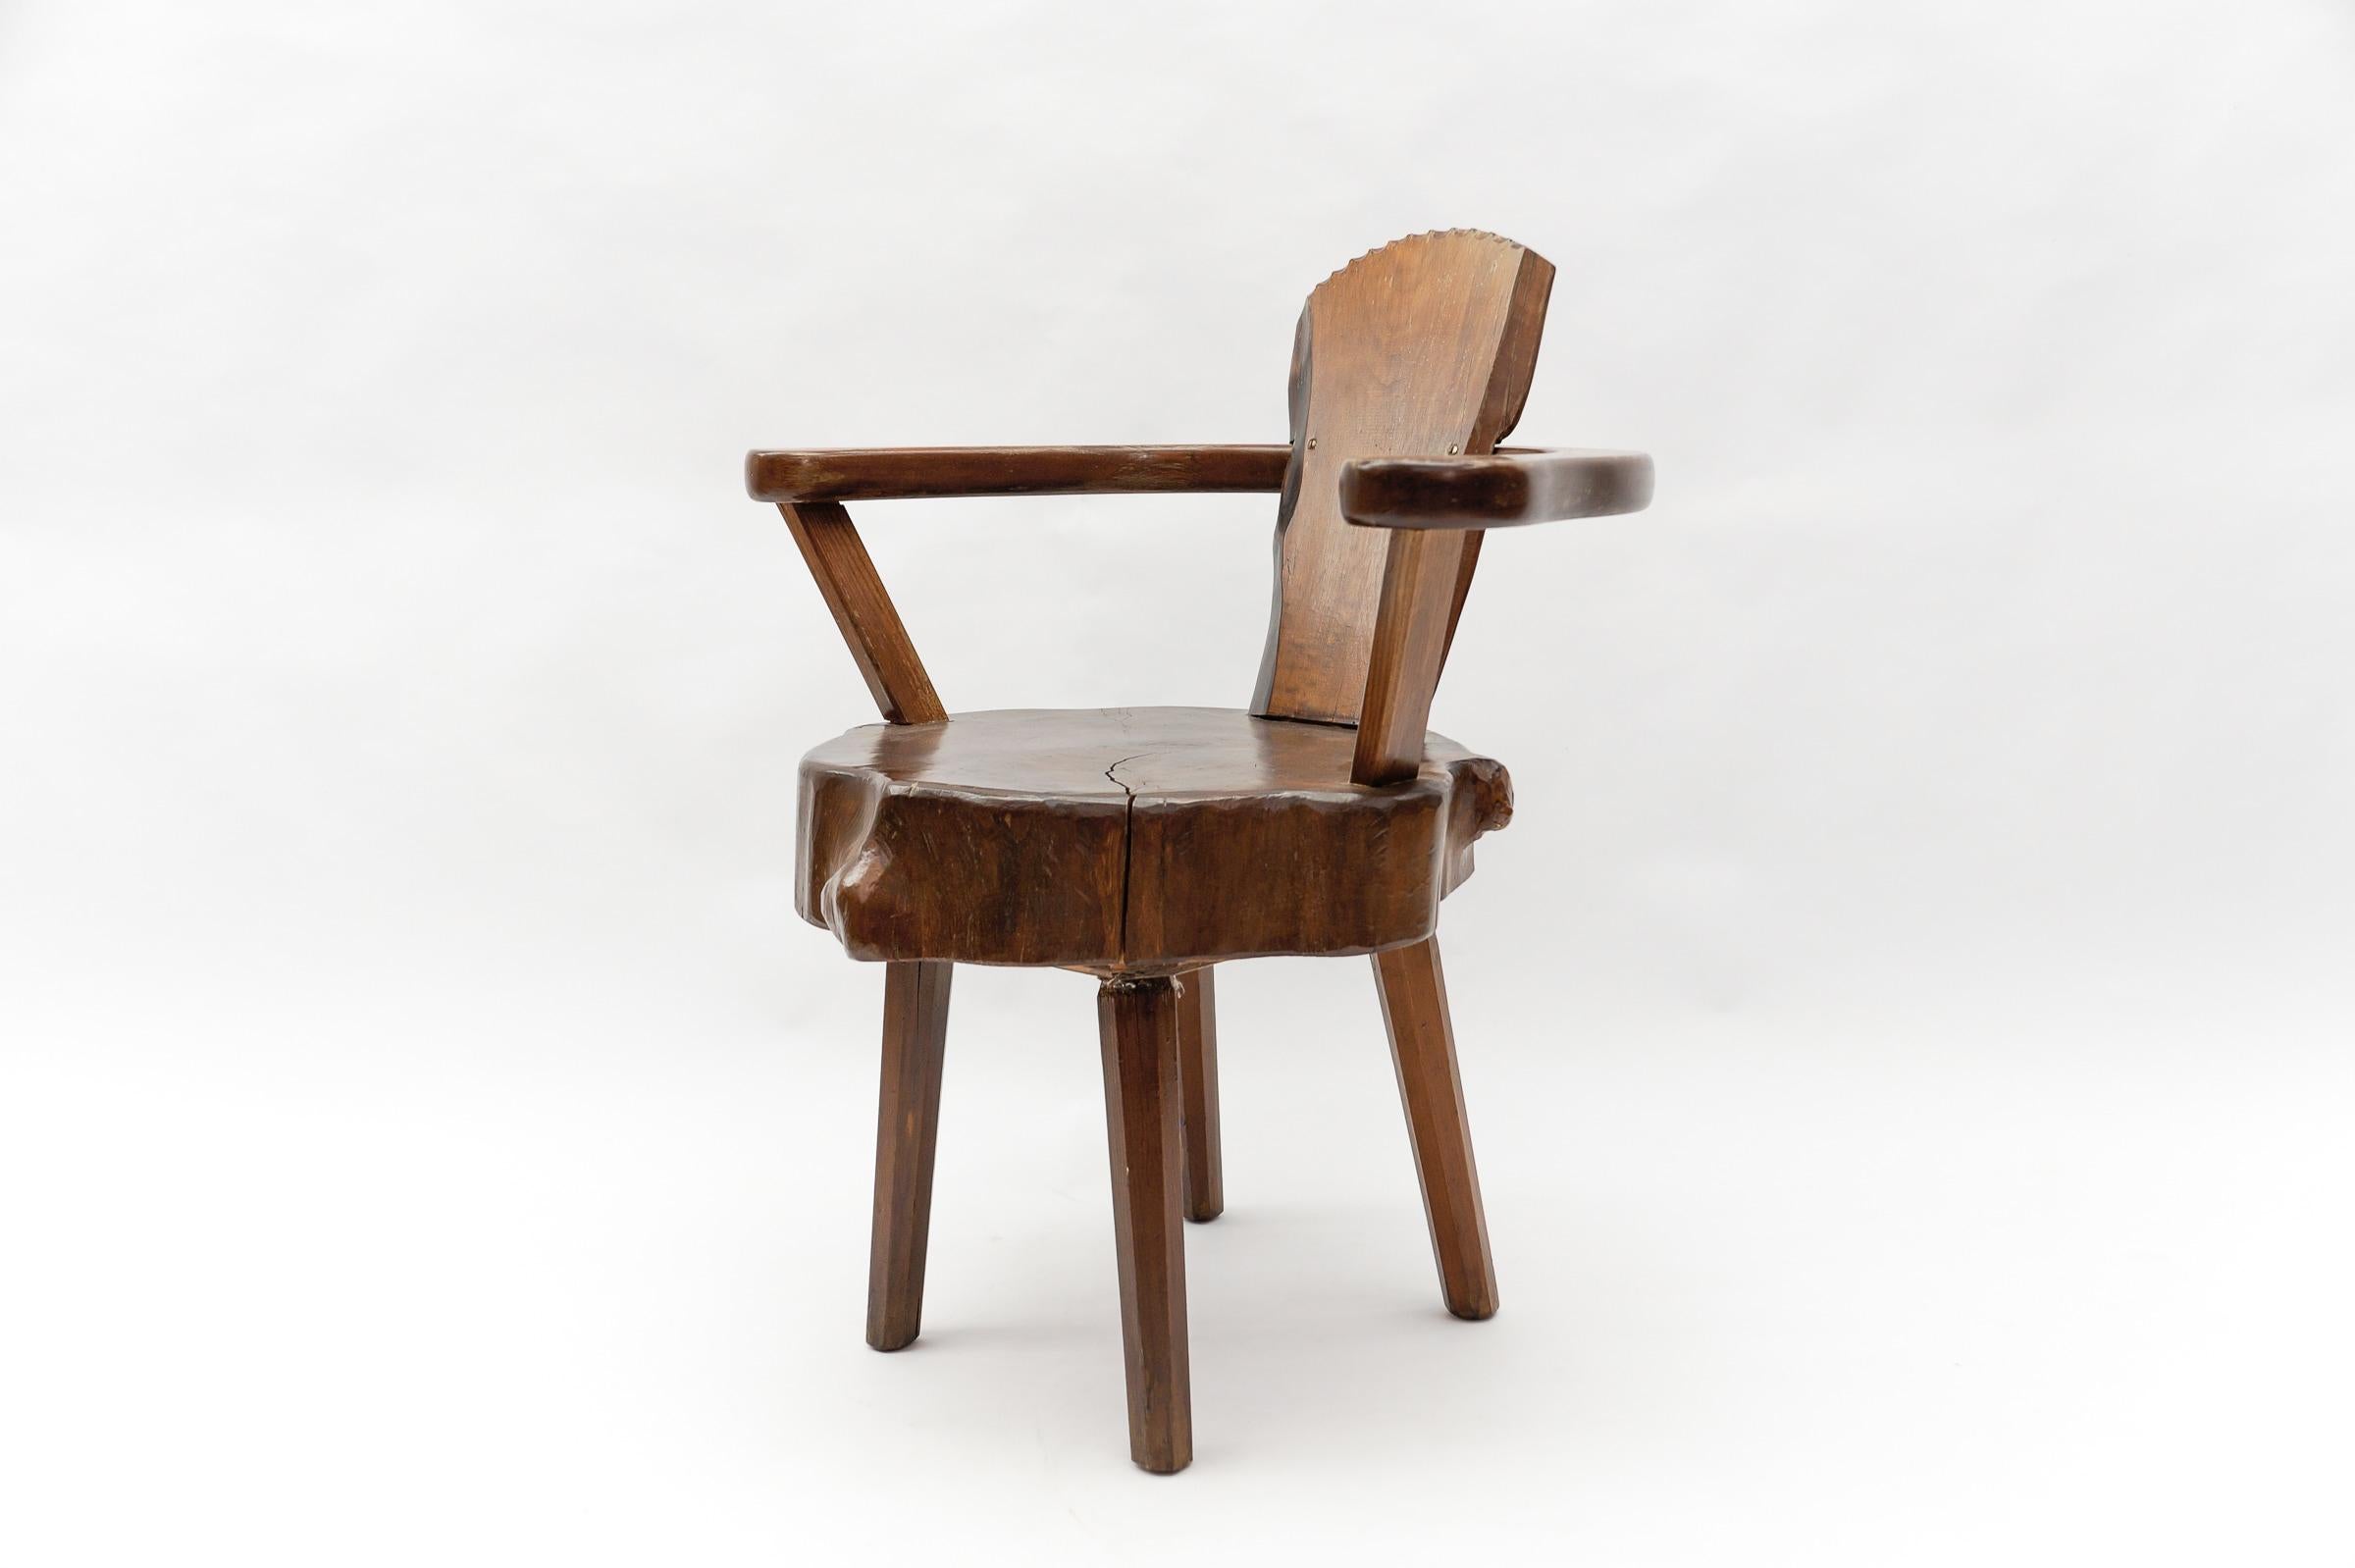 Rustic Mid-Century Modern French Wooden Armchair, Pierre Chapo Attributed, 1960s For Sale